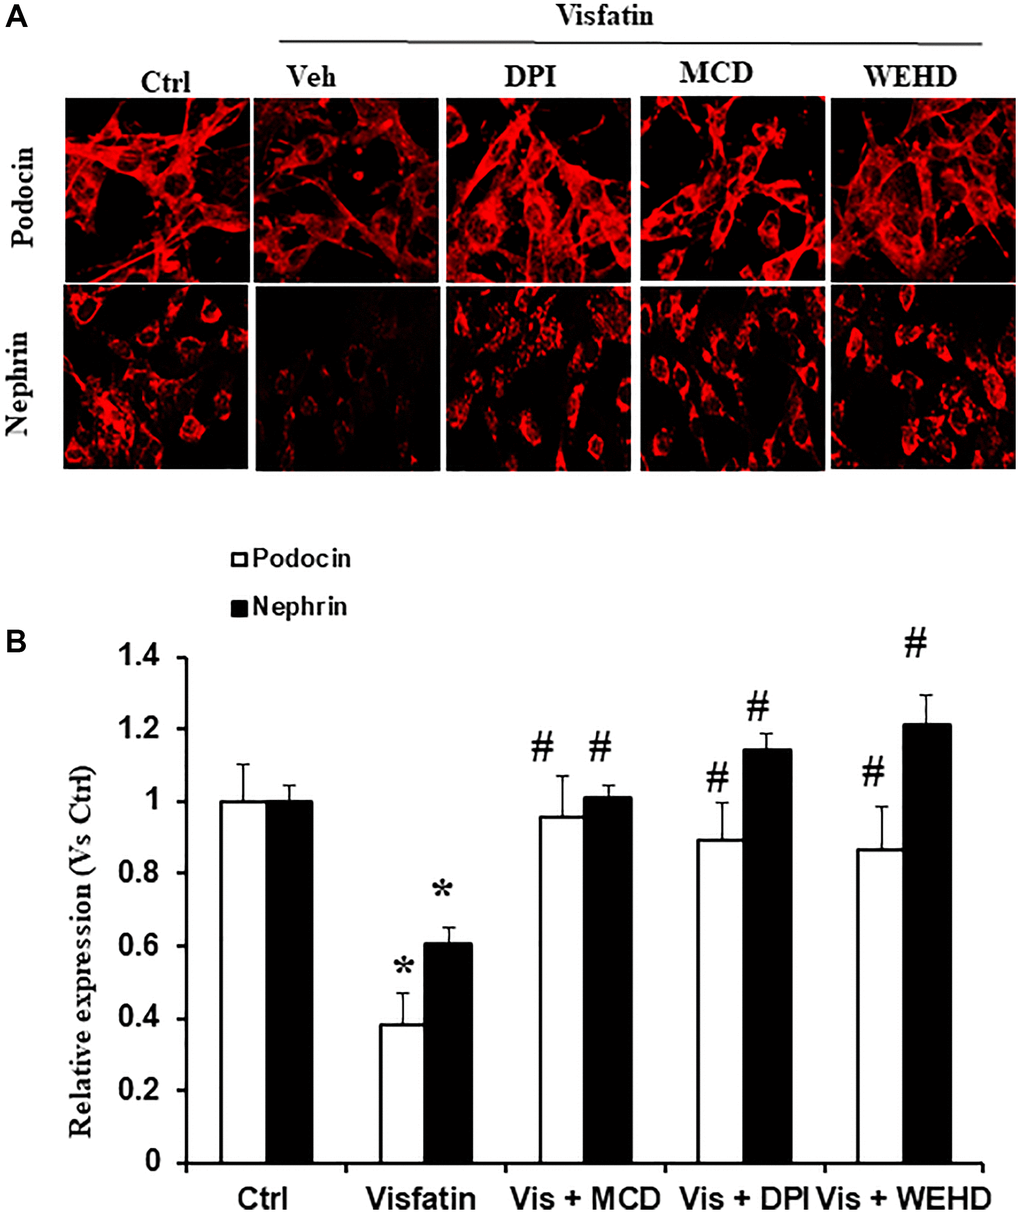 Effects of Visfatin on podocyte injury. (A) Representative immunofluorescence staining of podocin, nephrin, in podocytes with or without stimulation of visfatin, DPI or MCD or WEHD (original magnification, 400x). (B) Summarized data show the percentage of podocyte positive for podocin and nephrin (n = 6). Values are means ± SEM, showing fold changes as compared with control. Abbreviations: Ctrl: Control; Veh: Vehicle; Vis: Visfatin; DPI: diphenyleneiodonium; MCD: methyl-β-cyclodextrin. *P #P 